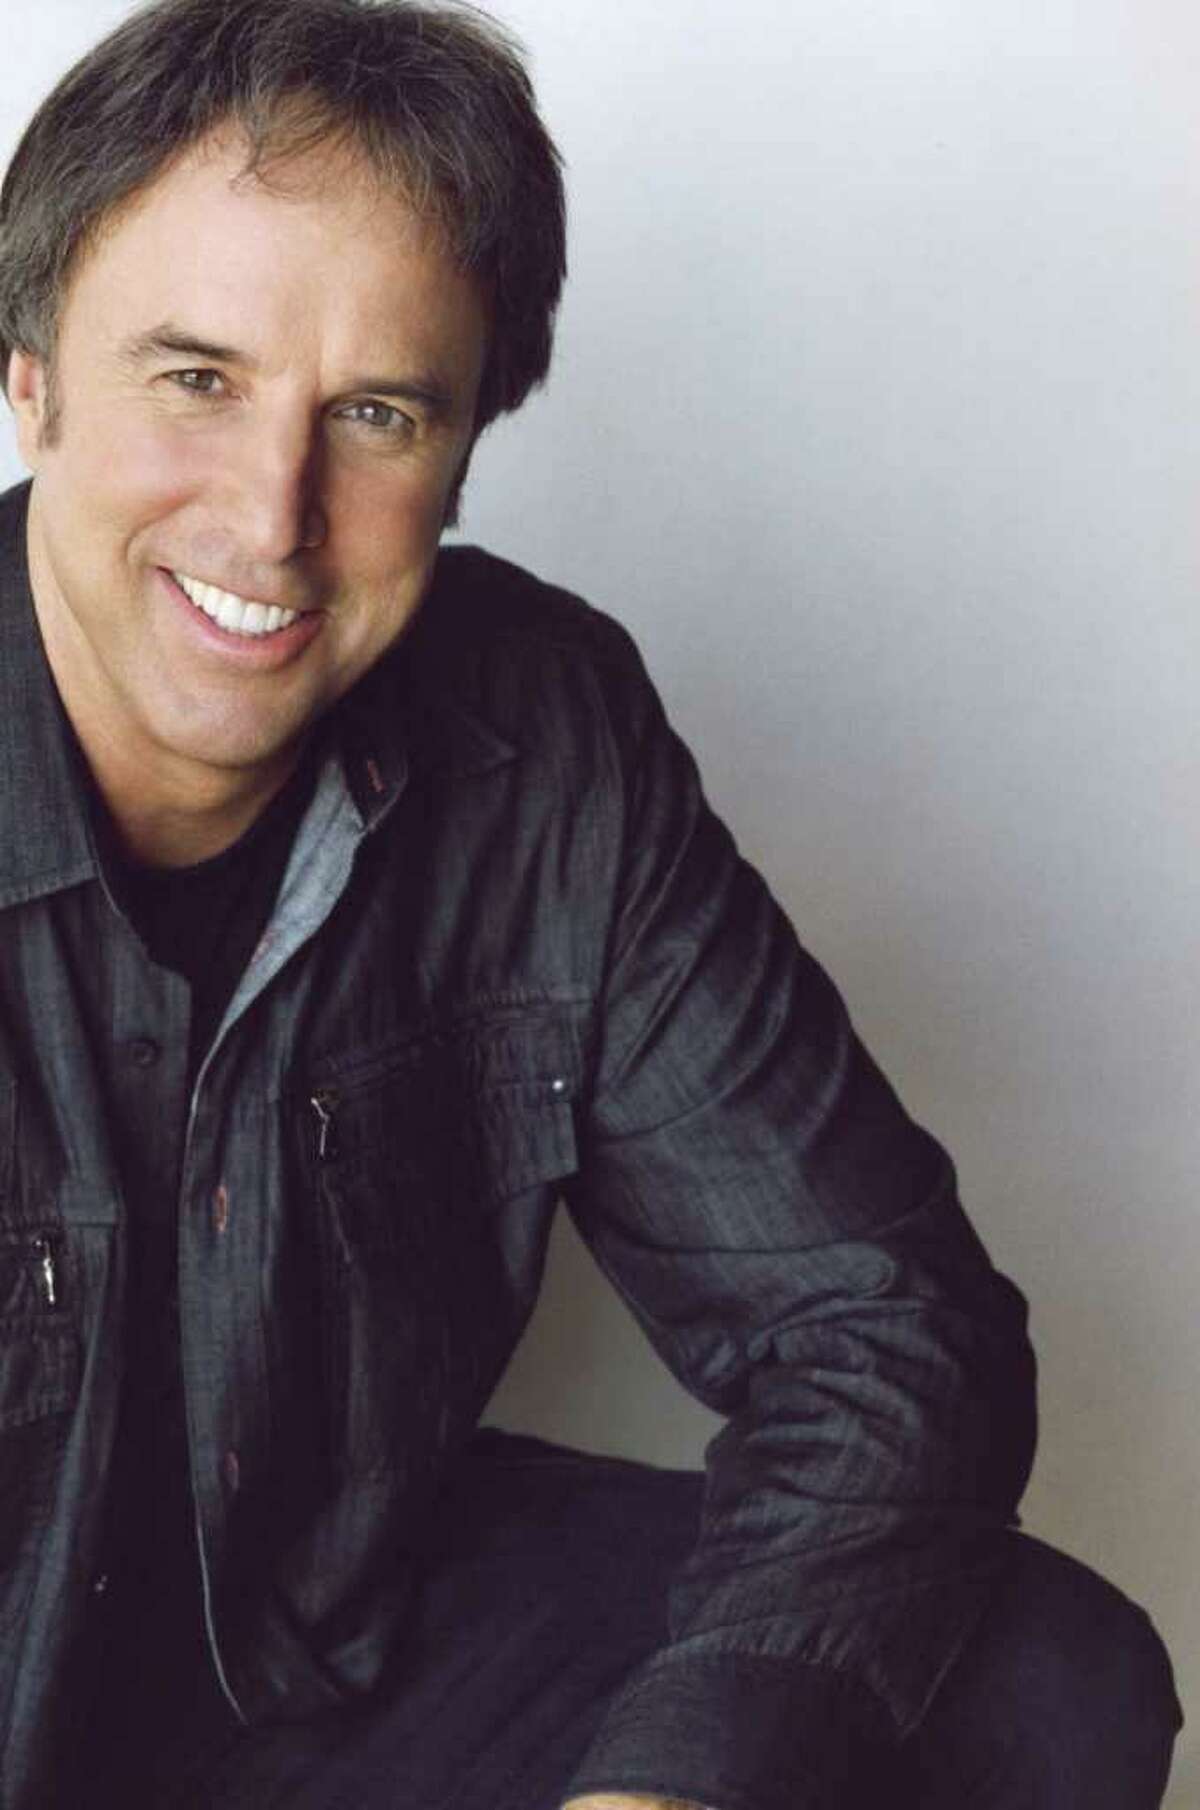 Kevin Nealon (Saturday Night Live/Weeds), who will perform at Improv Houston